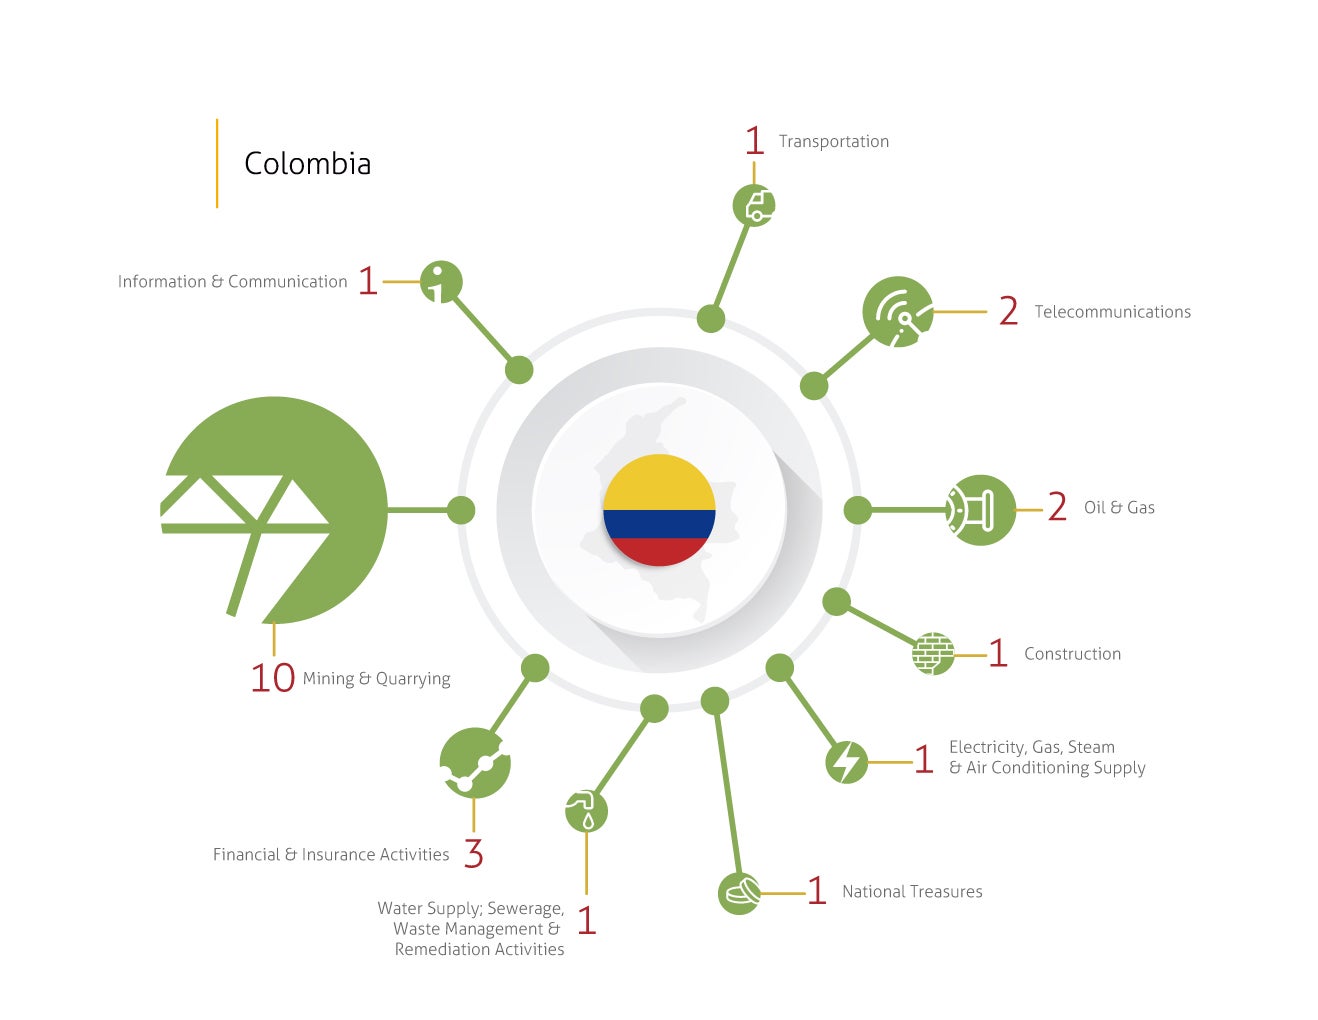 Industries involved in disputes - Colombia